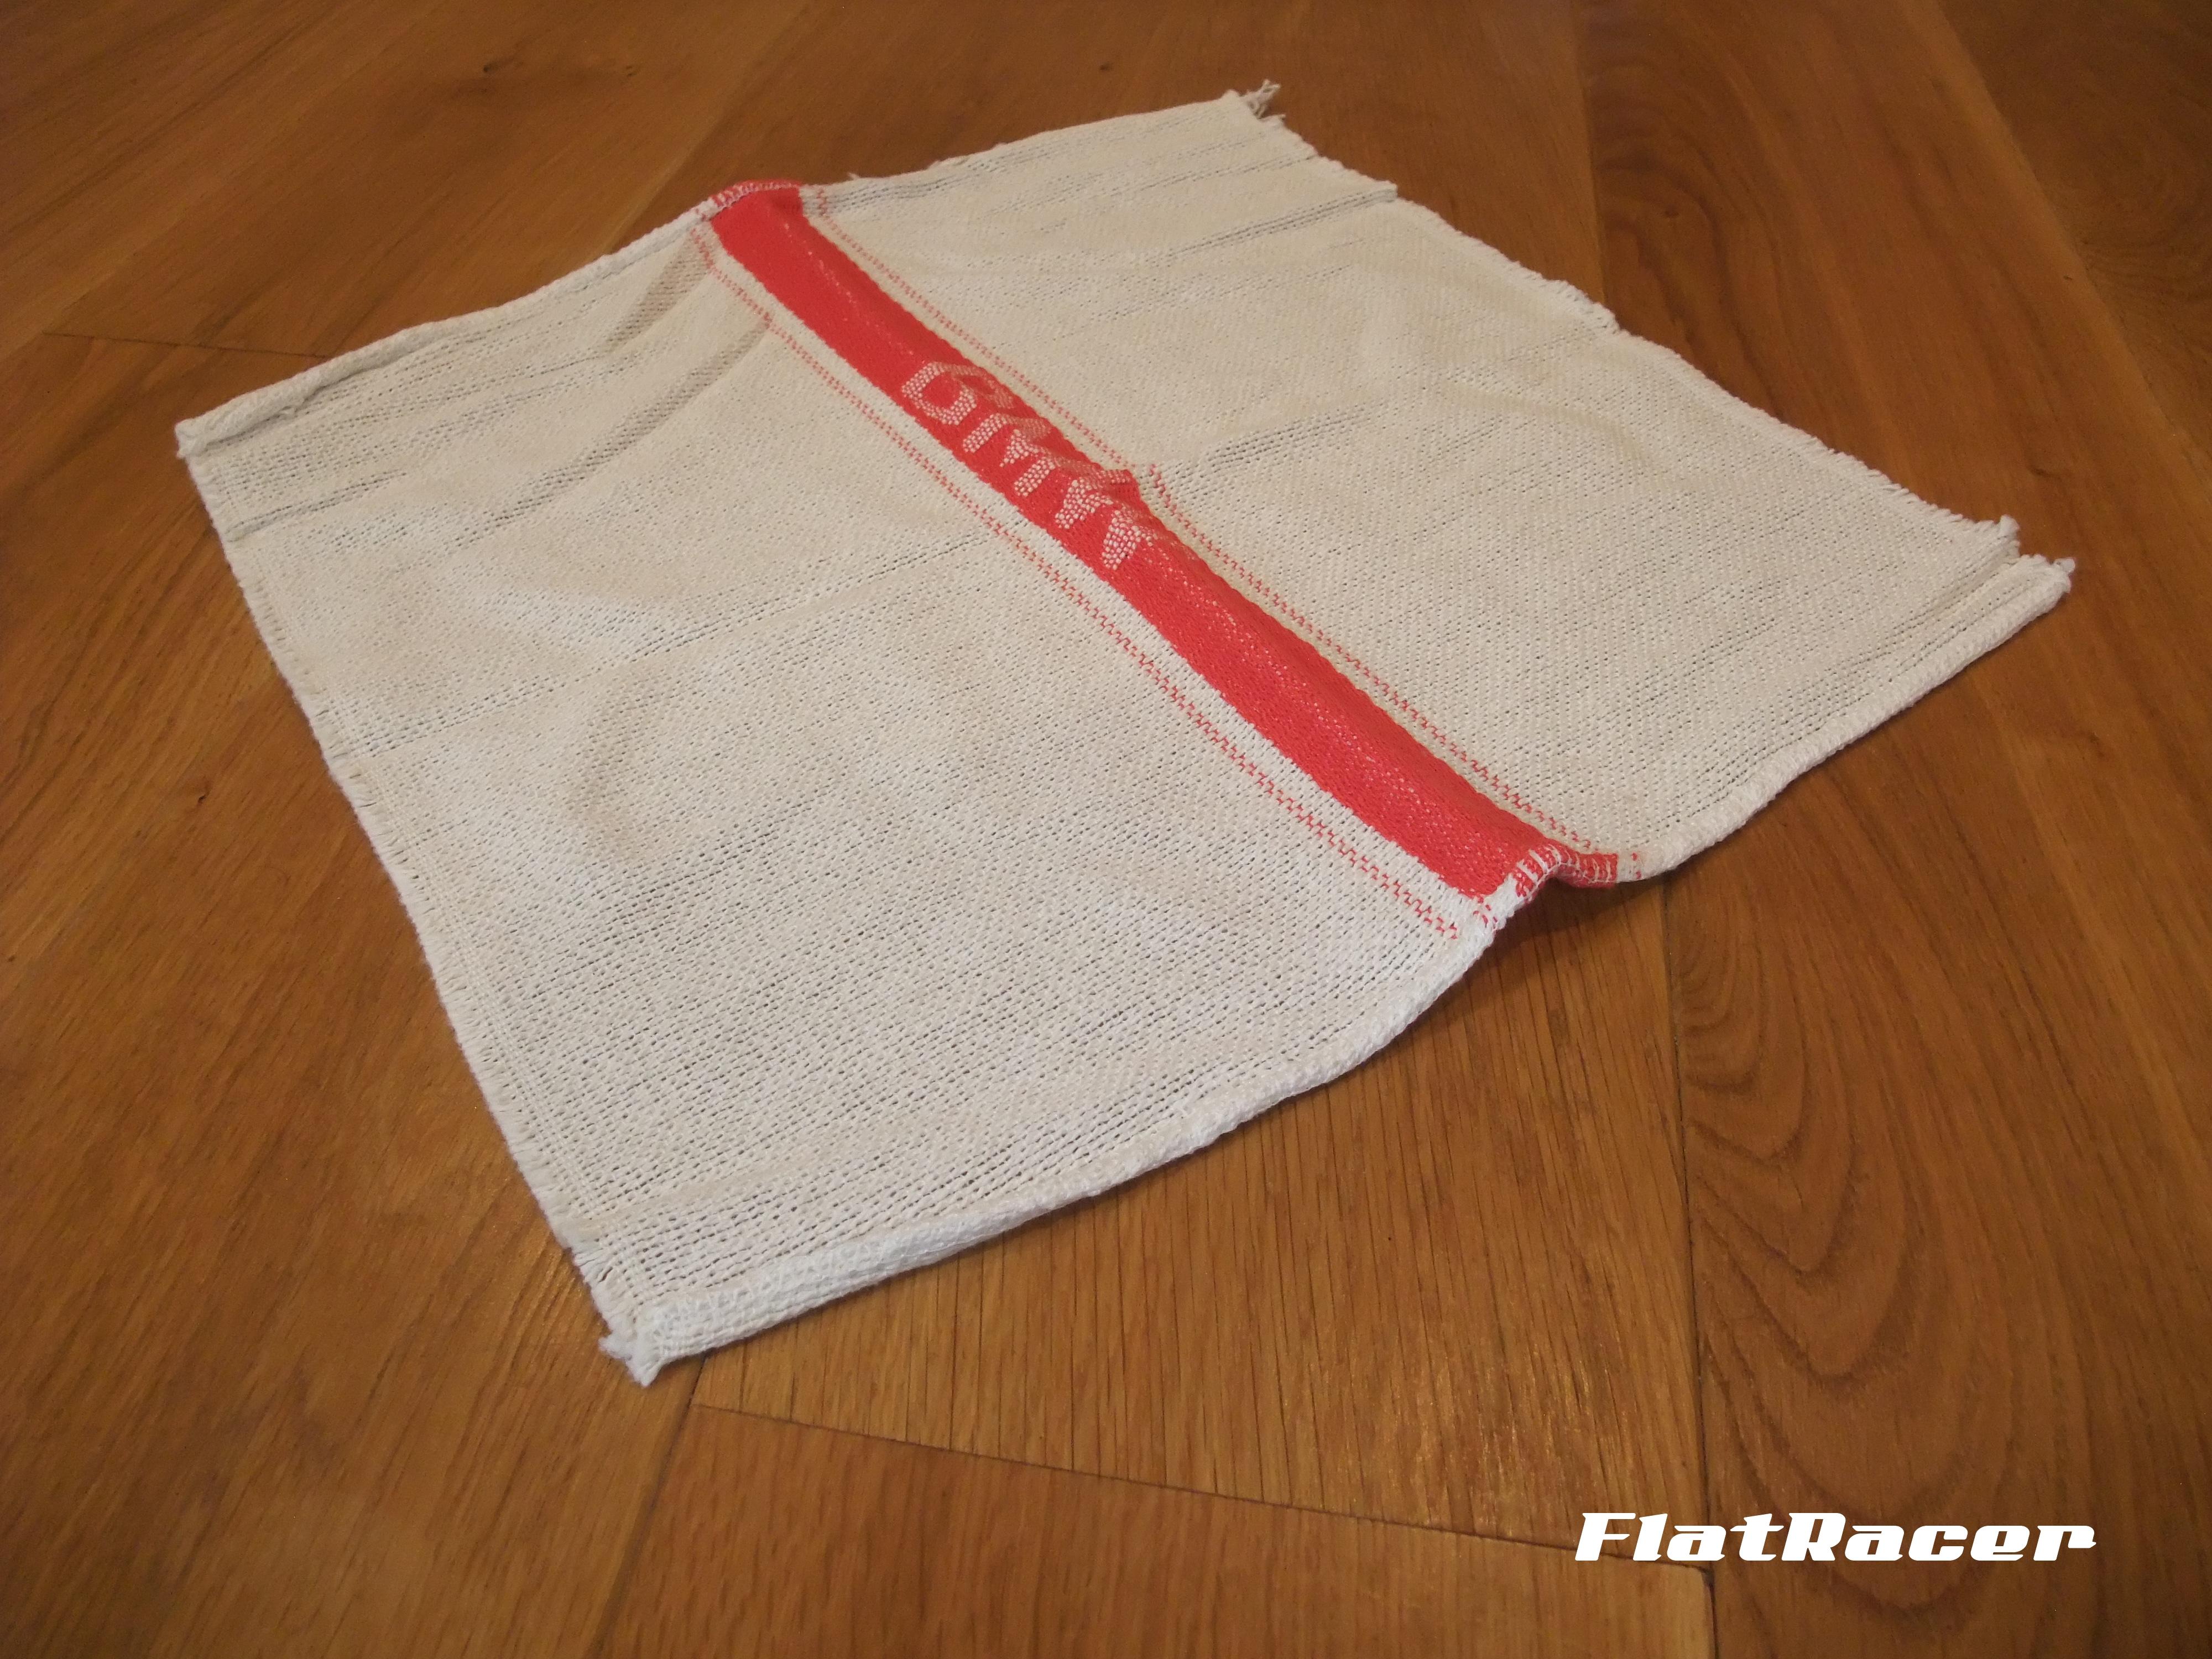 BMW Airhead Boxer tool kit rag towel - red lettering